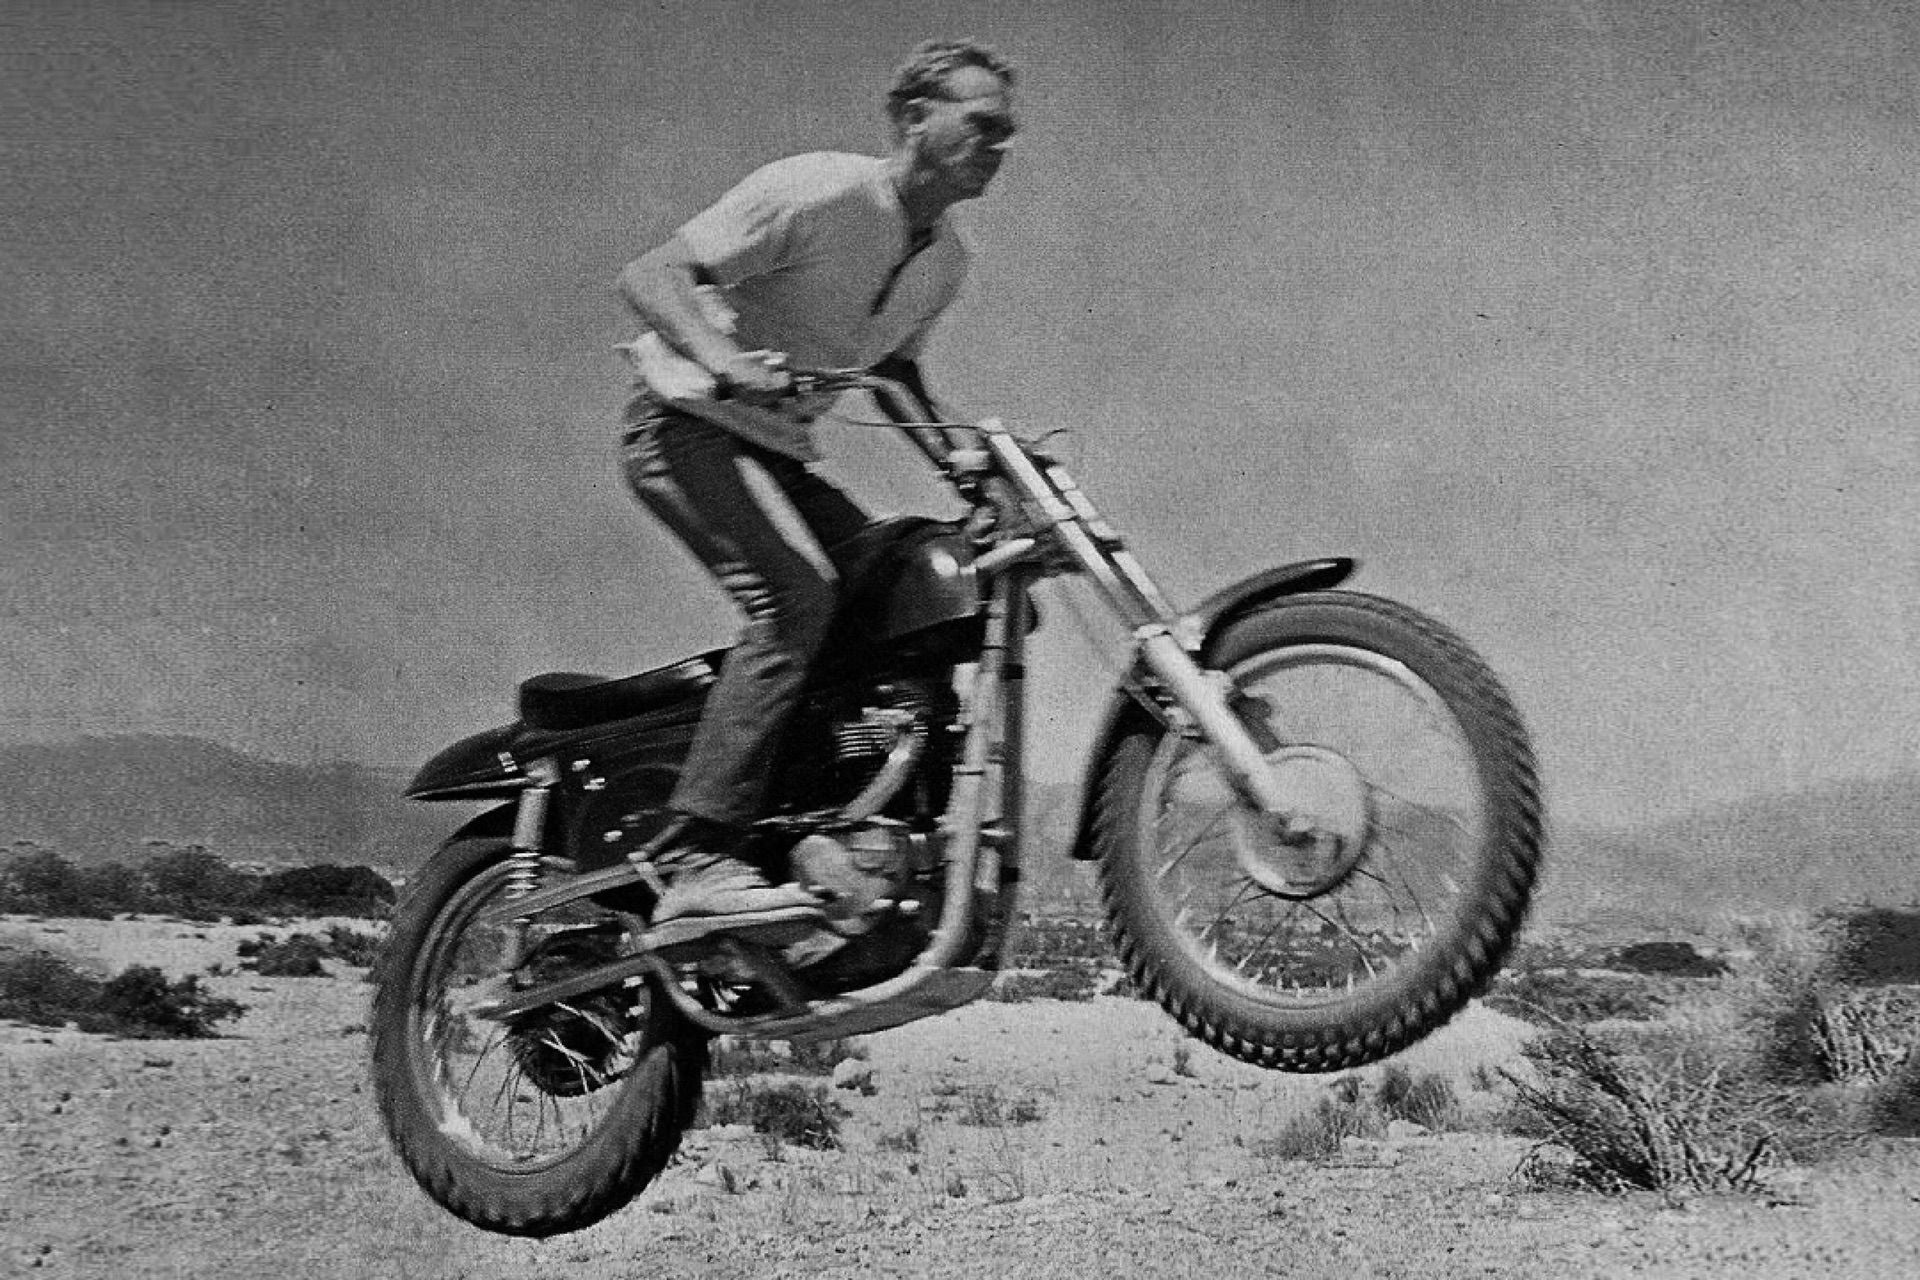 FRP important person in the dirt bike history